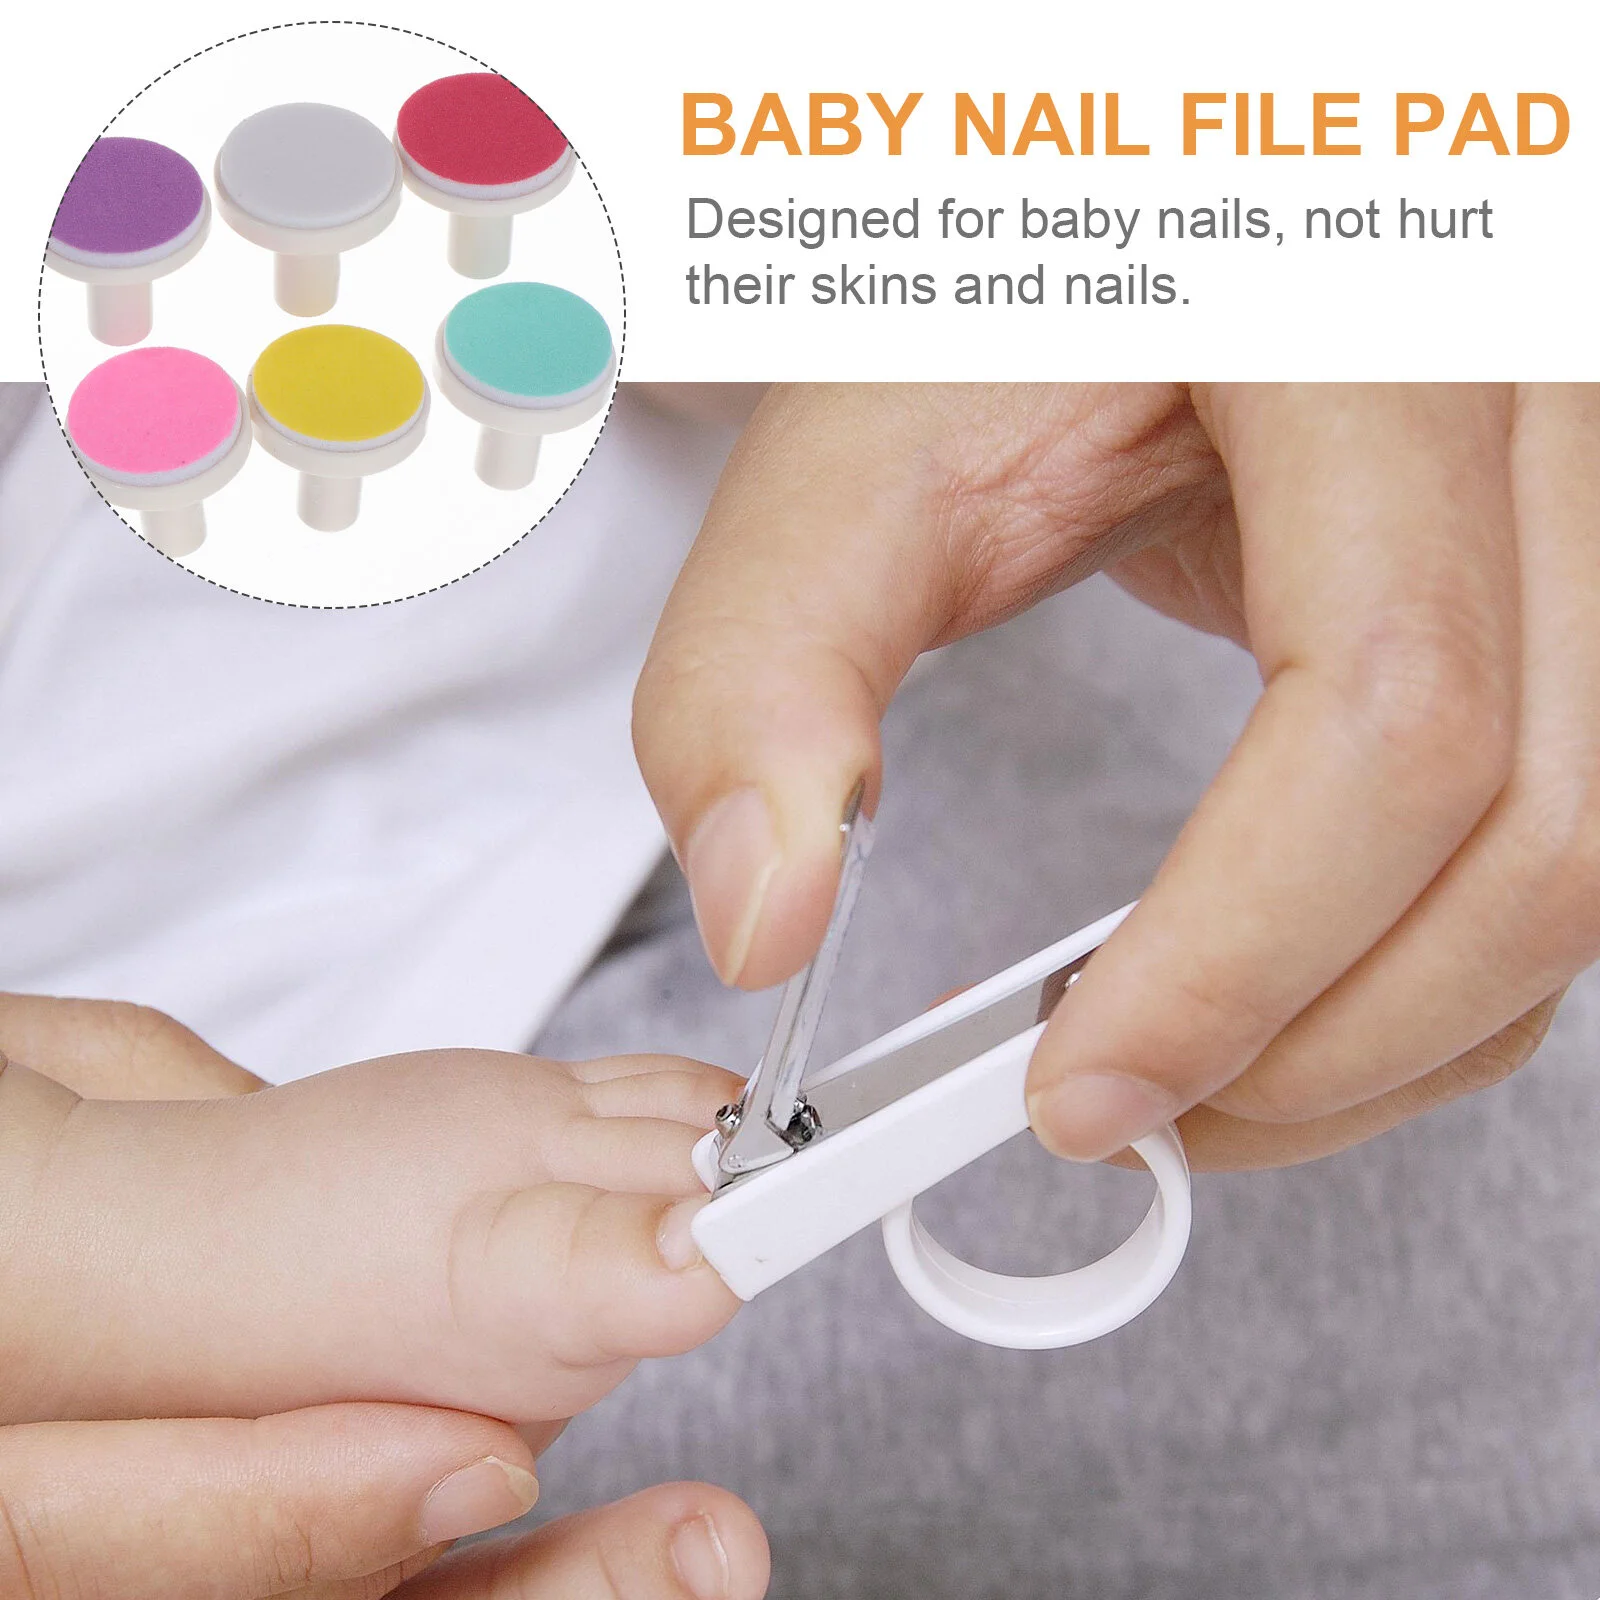 24 Pcs Grinding Head Baby Nail Trimmer Toddler File Pad Scissors Sandpaper Child images - 2